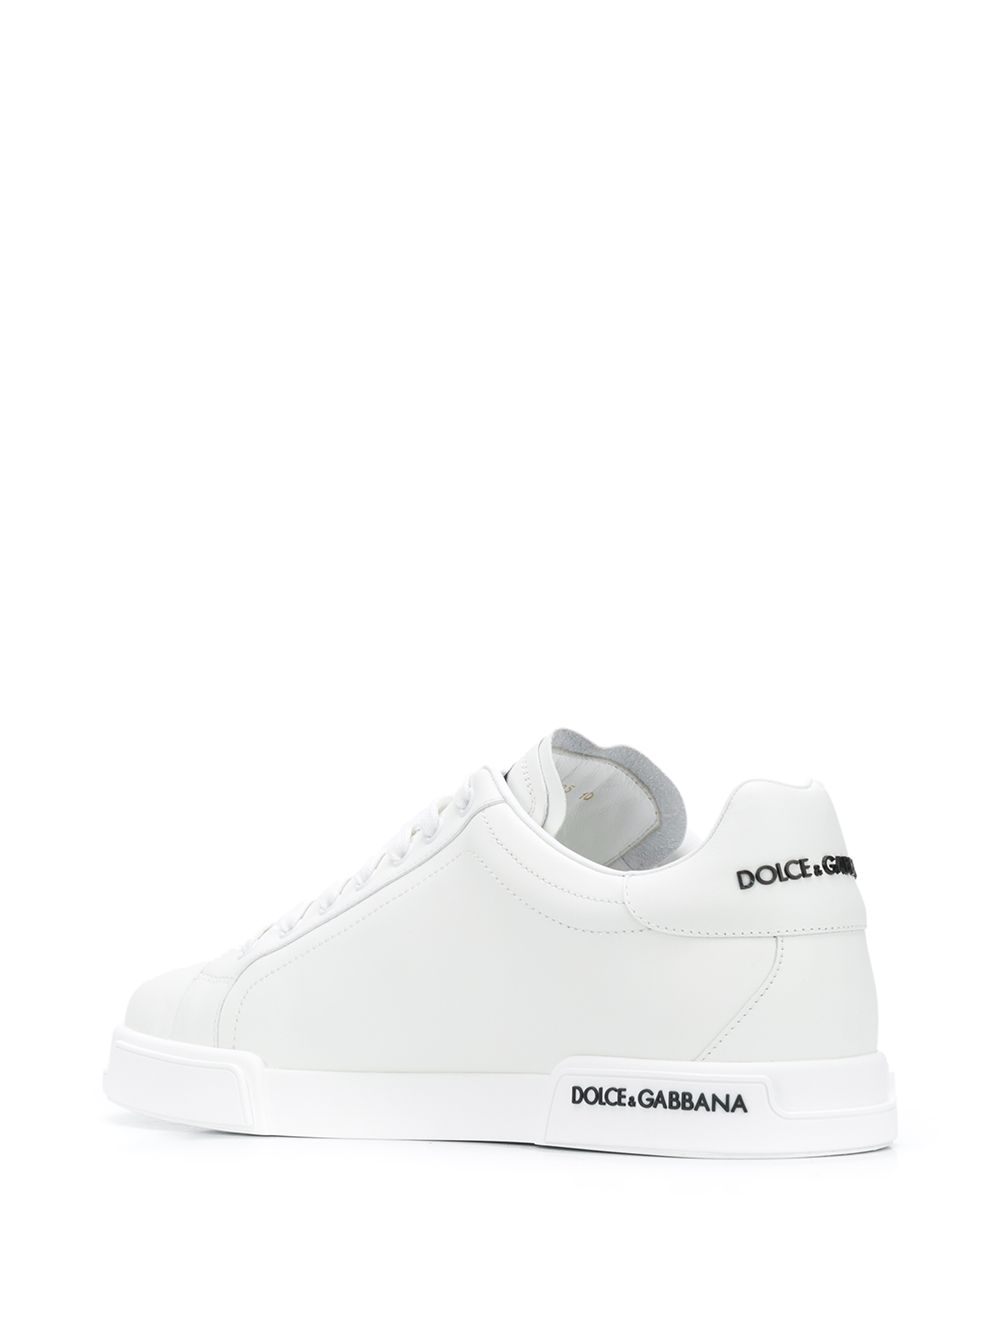 Total white sneakers